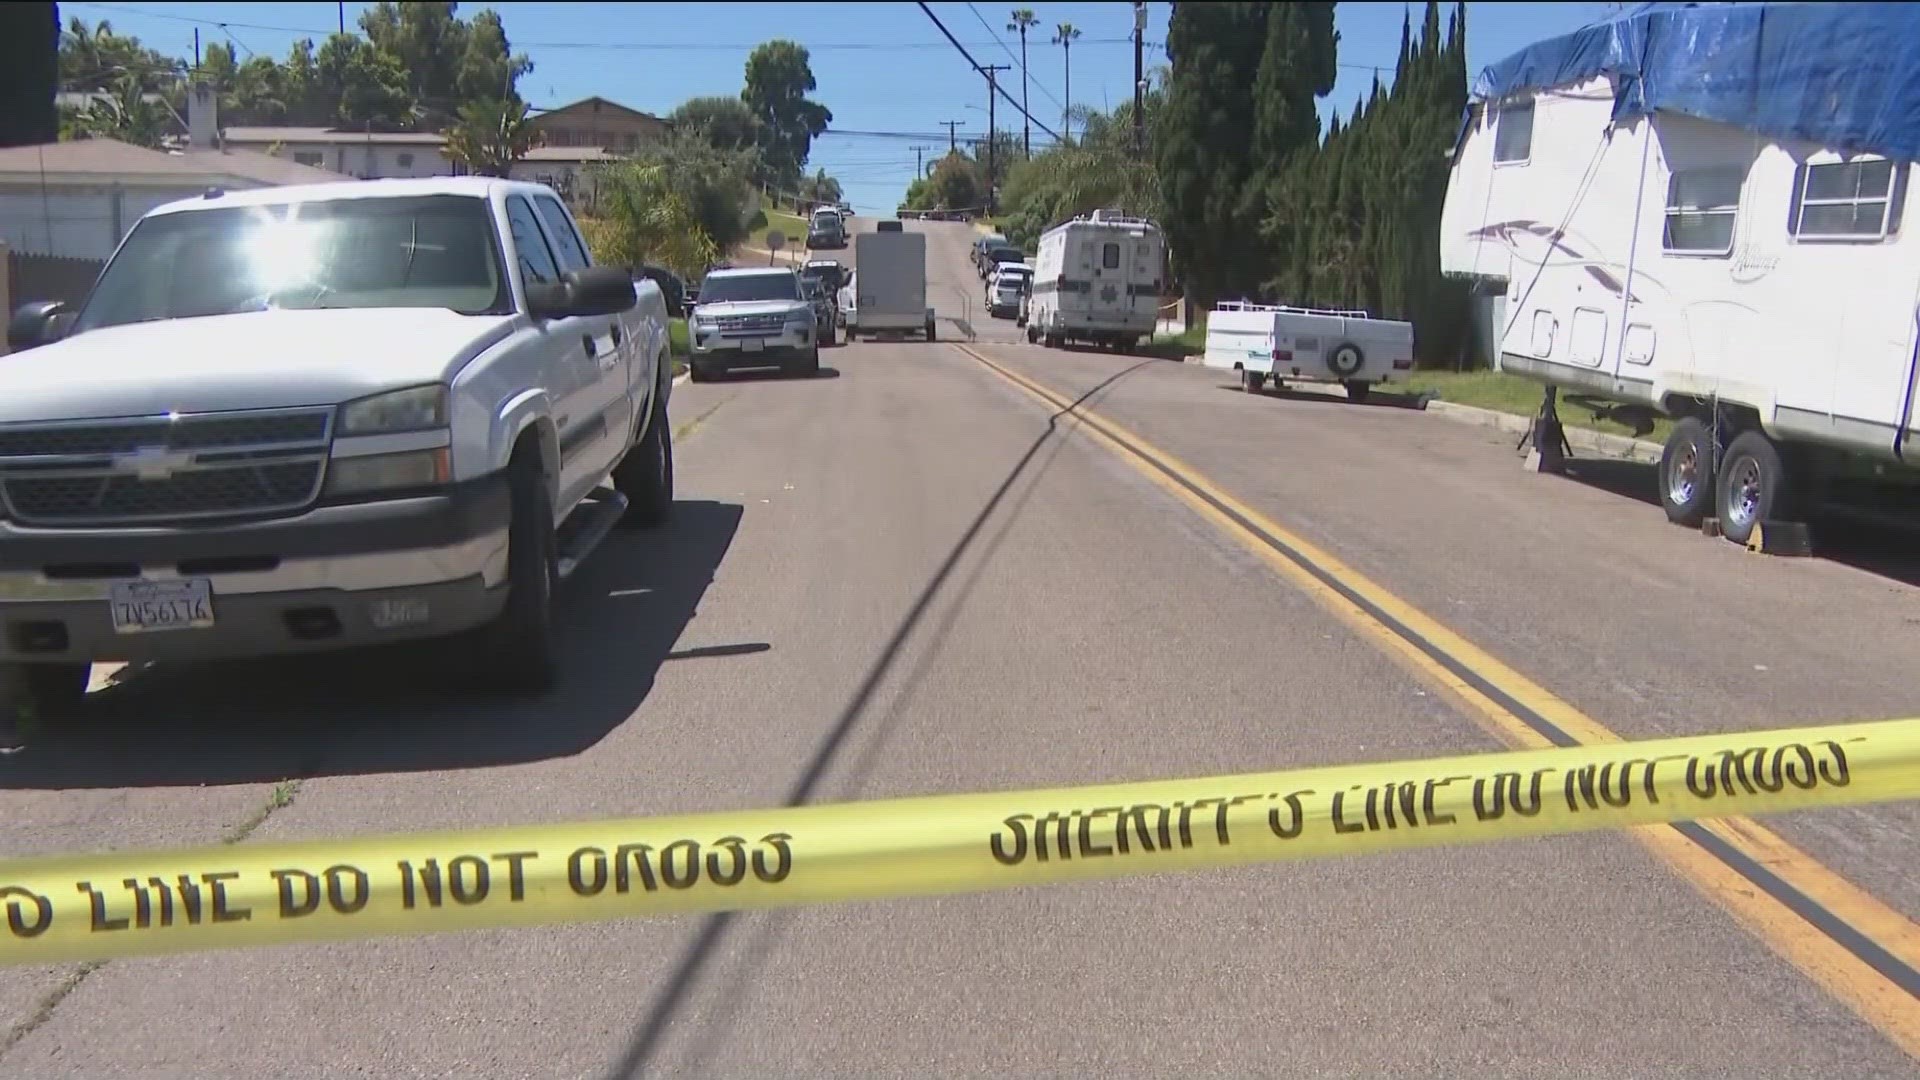 According to the Sheriff's Department, the suspect was found dead by law enforcement in Orange County.